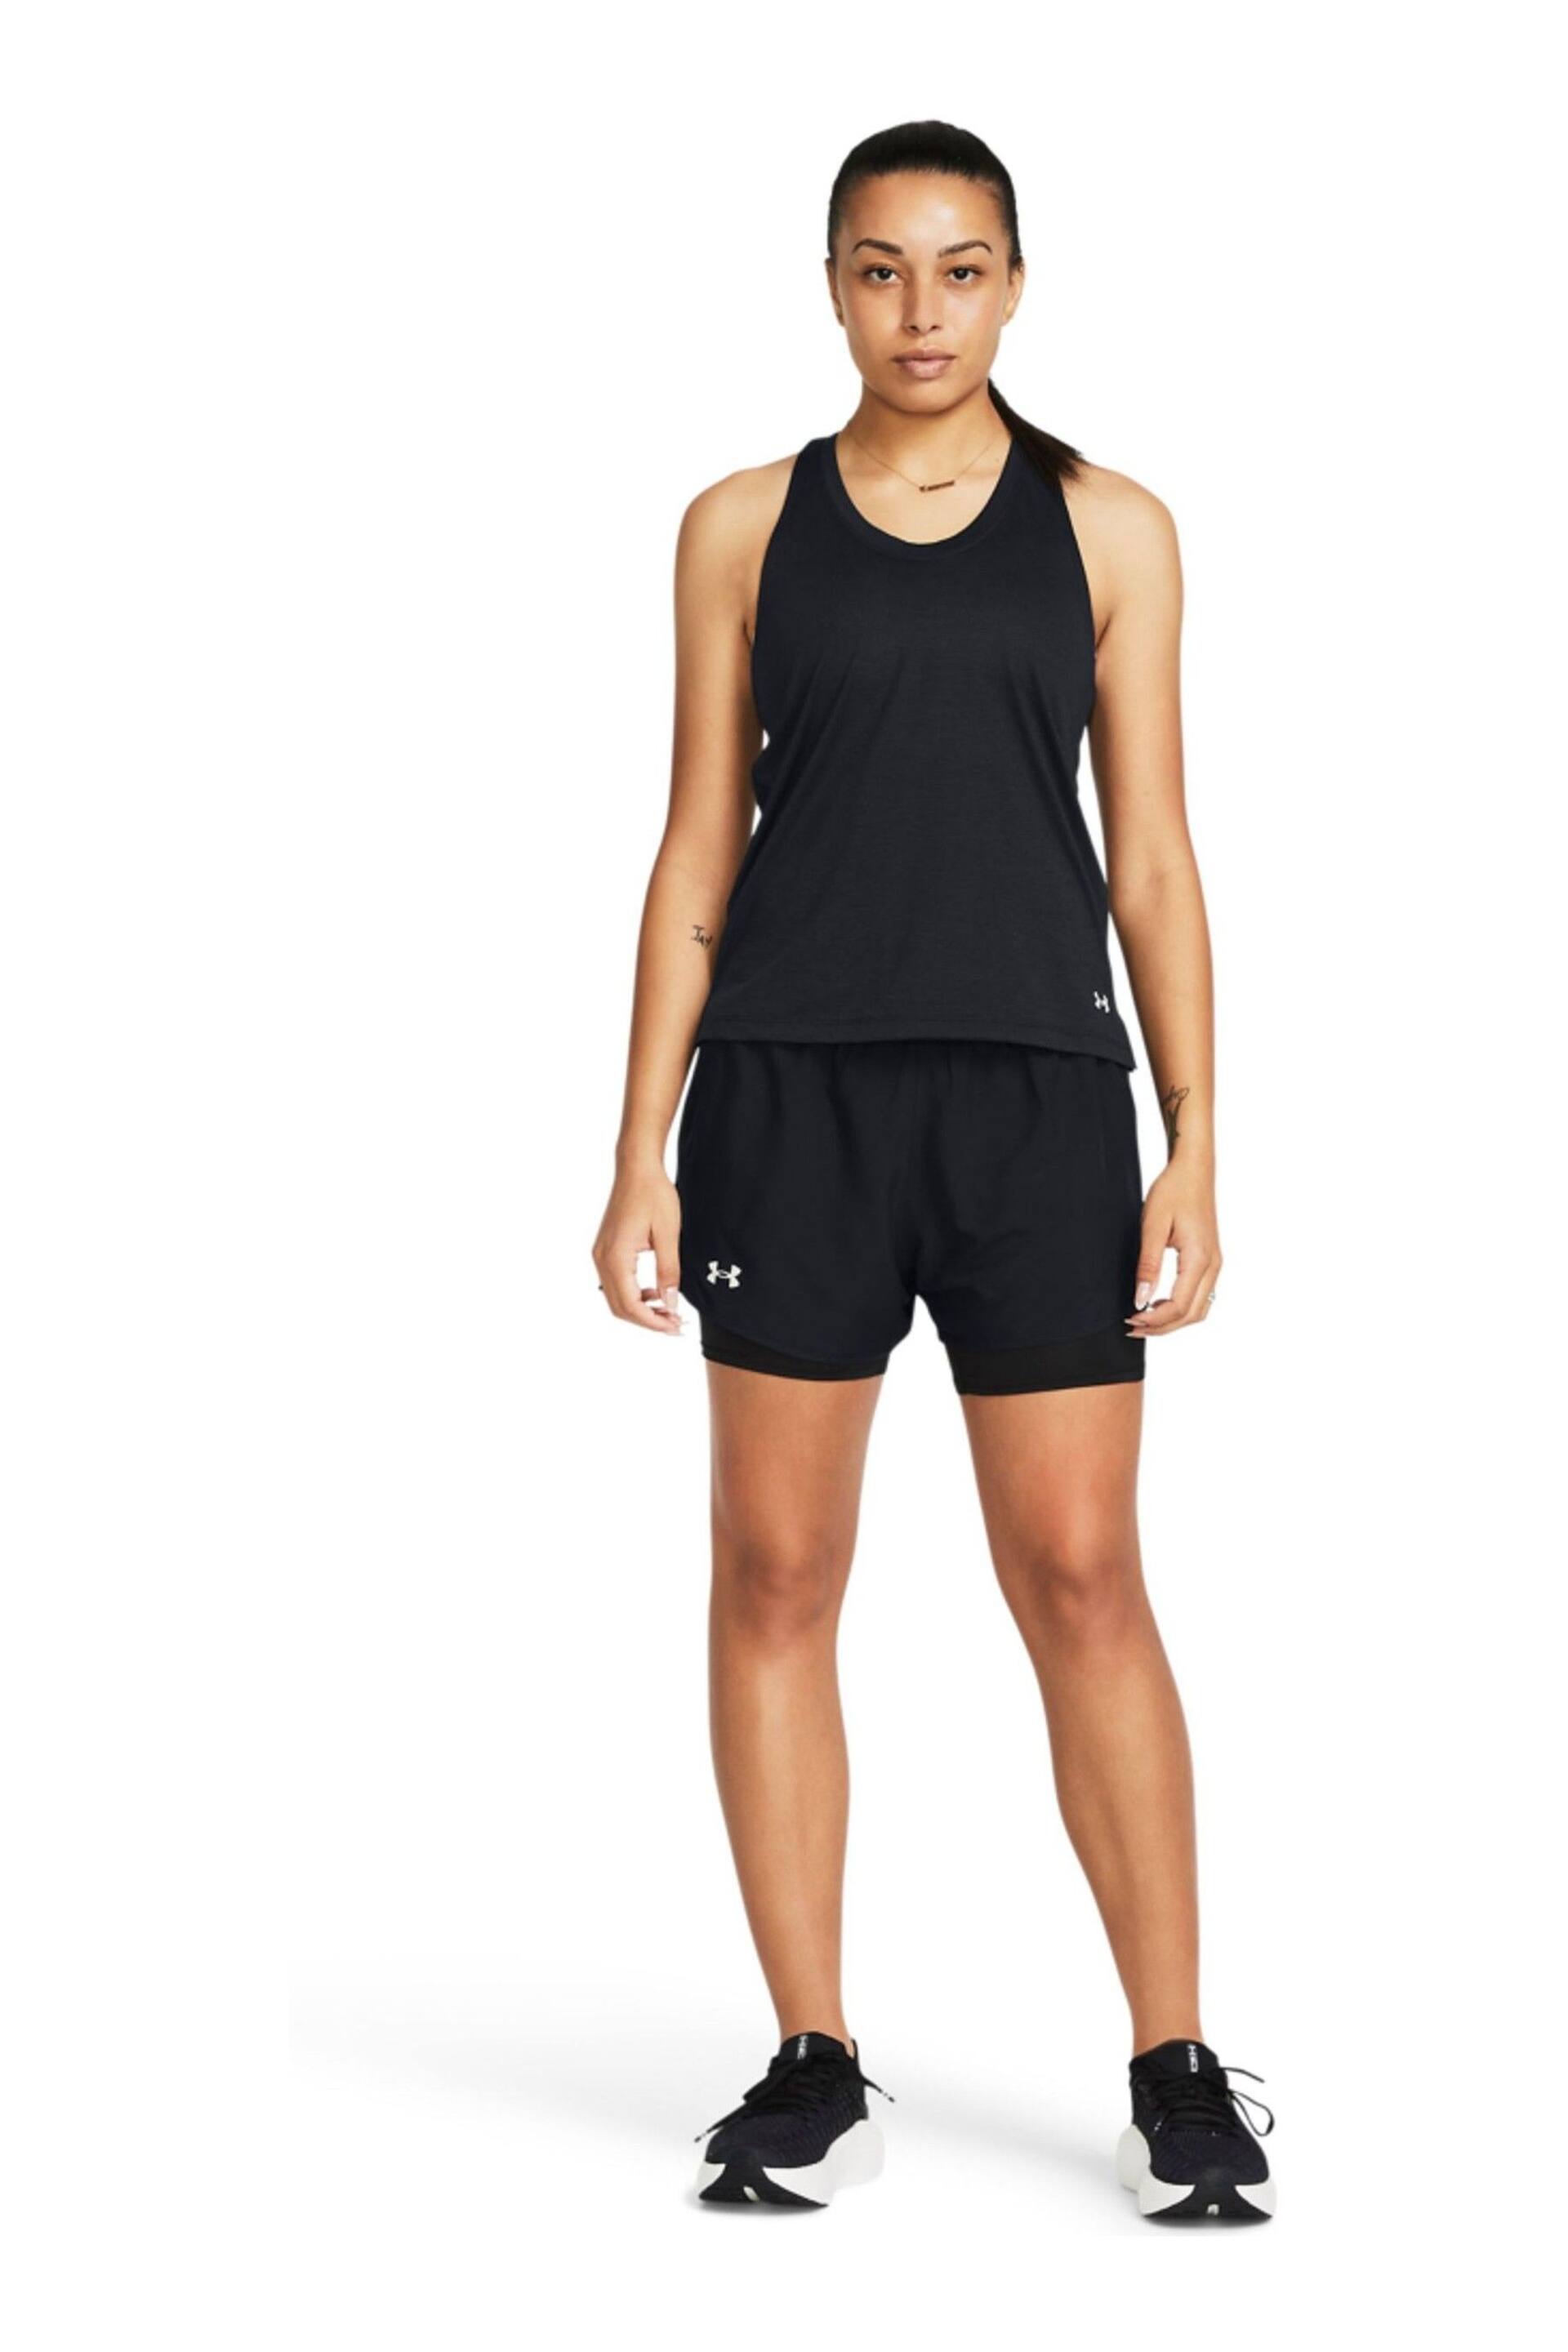 Under Armour Fly By 2 in 1 Black Shorts - Image 3 of 4